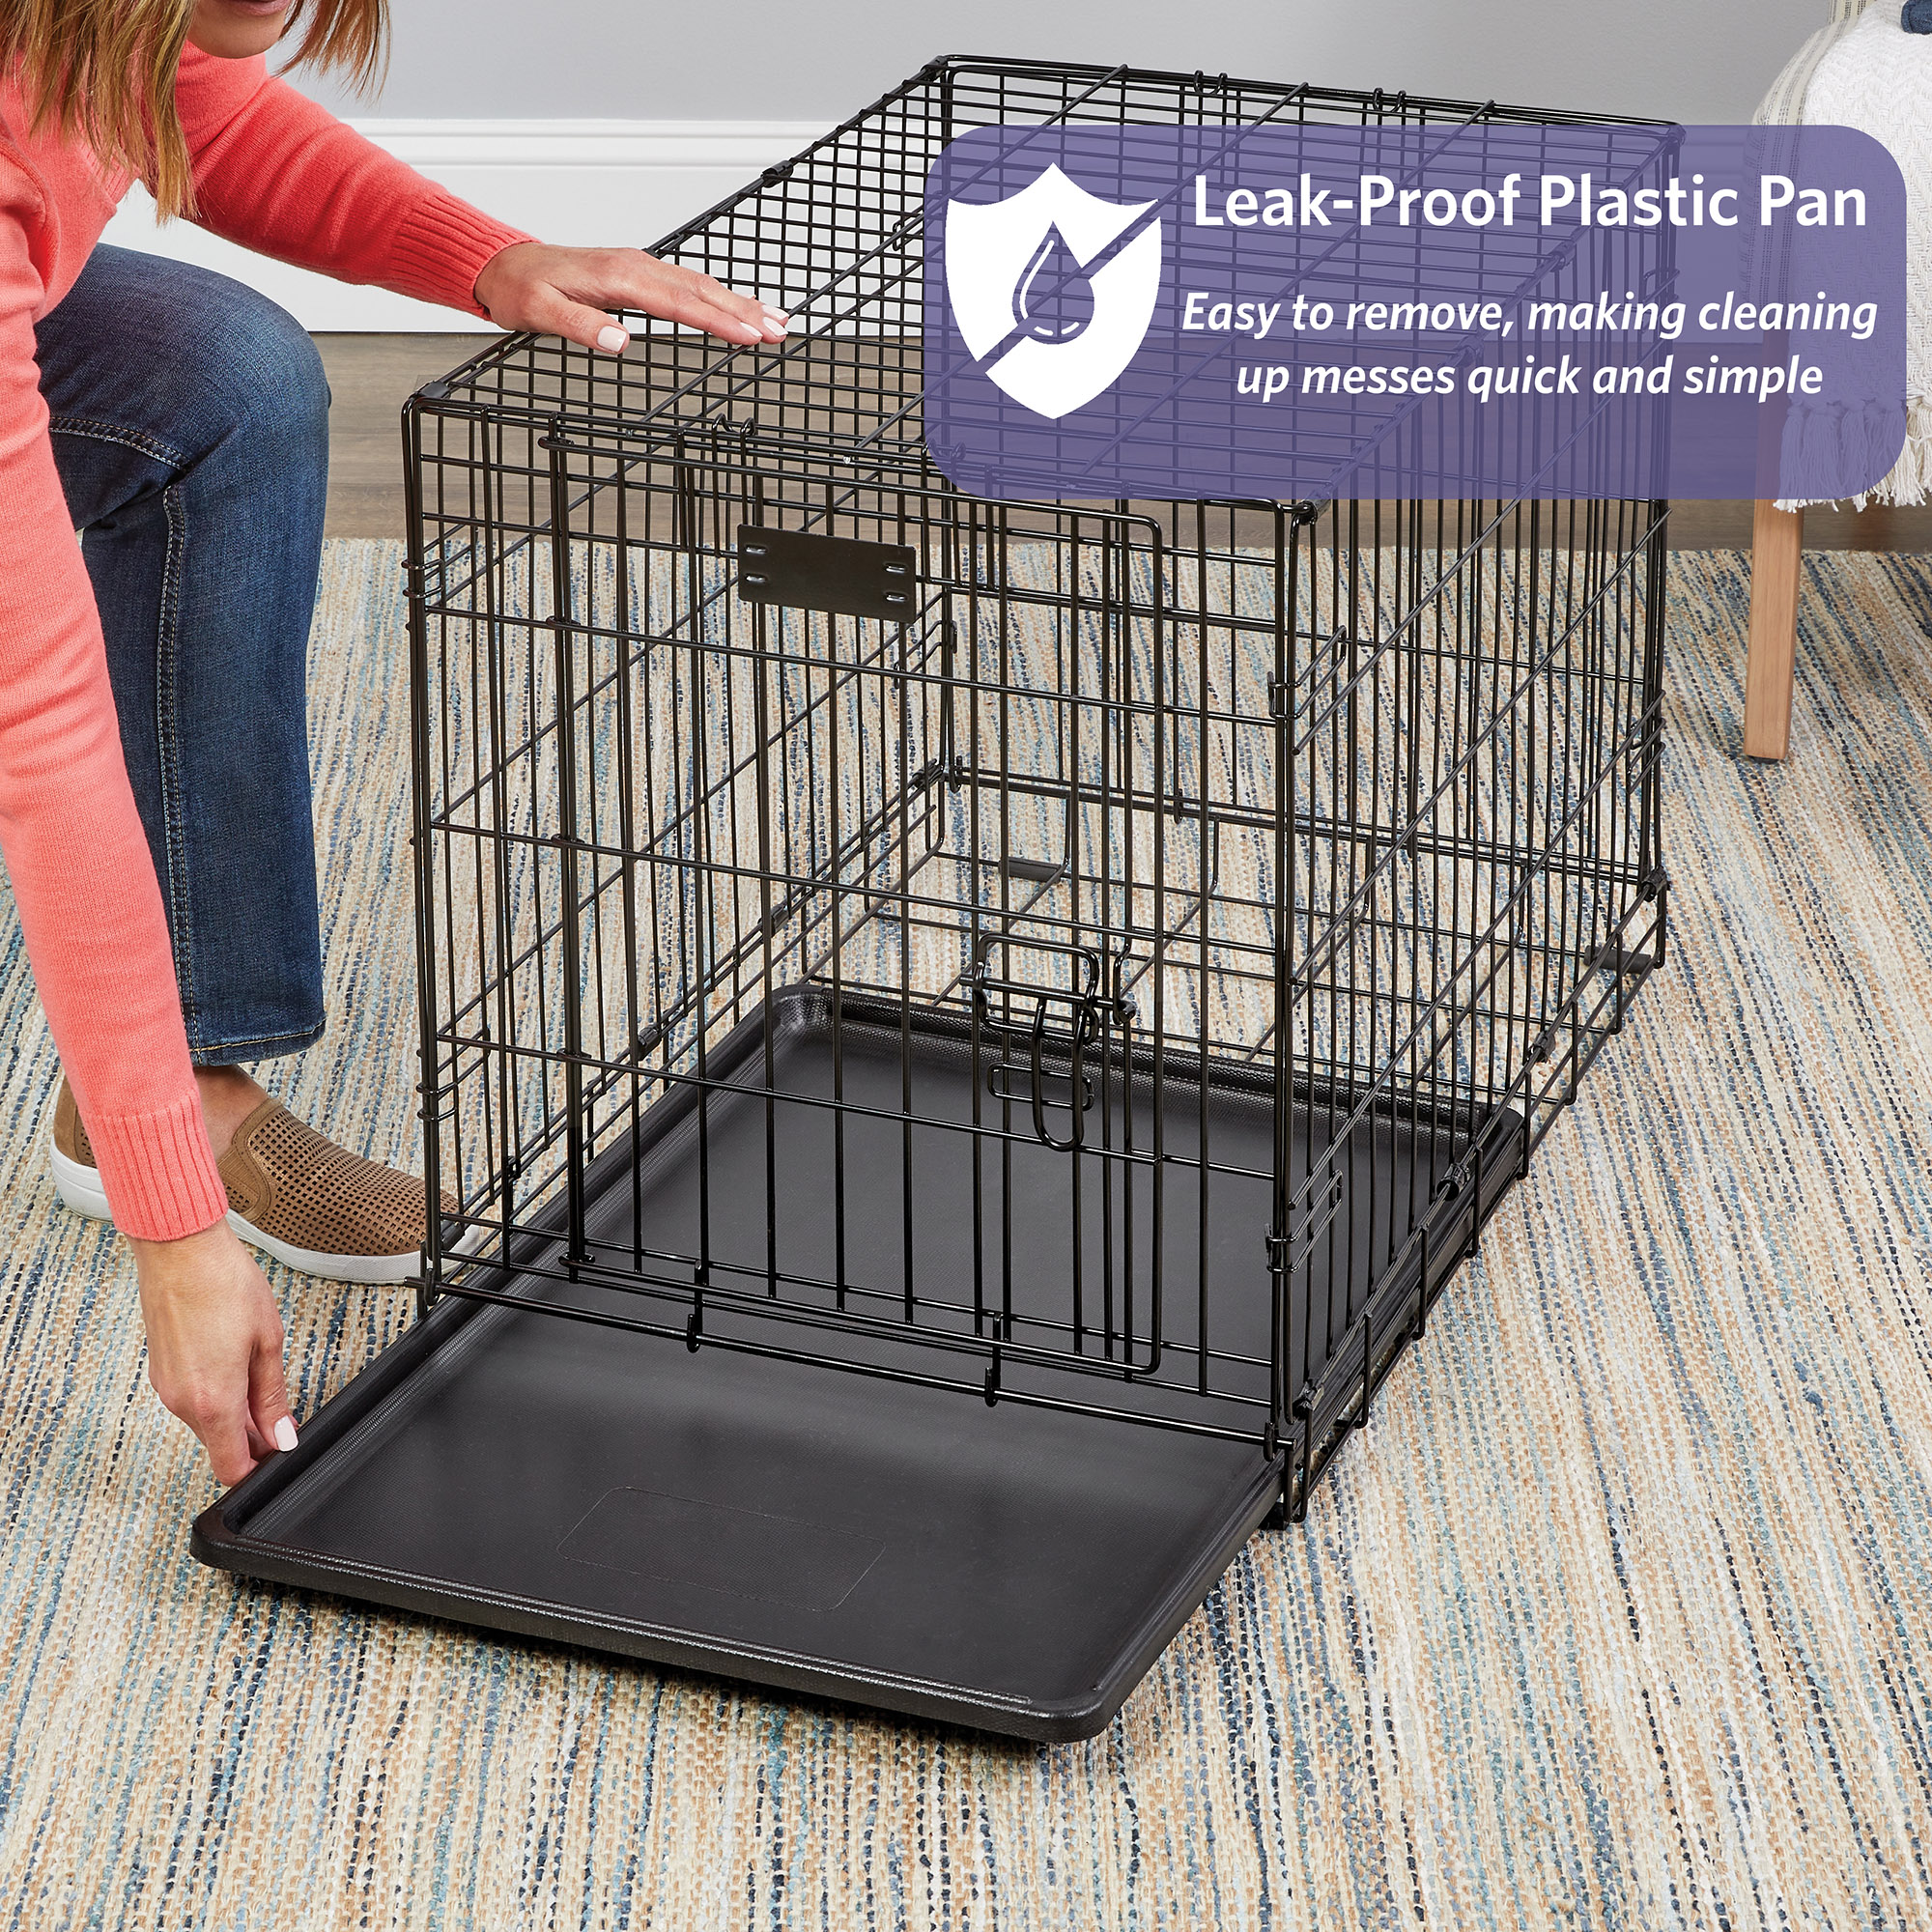 MidWest Homes for Pets Newly Enhanced Single Door iCrate Dog Crate, Includes Leak-Proof Pan, Floor Protecting Feet, Divider Panel & New Patented, 42 Inch - image 5 of 8